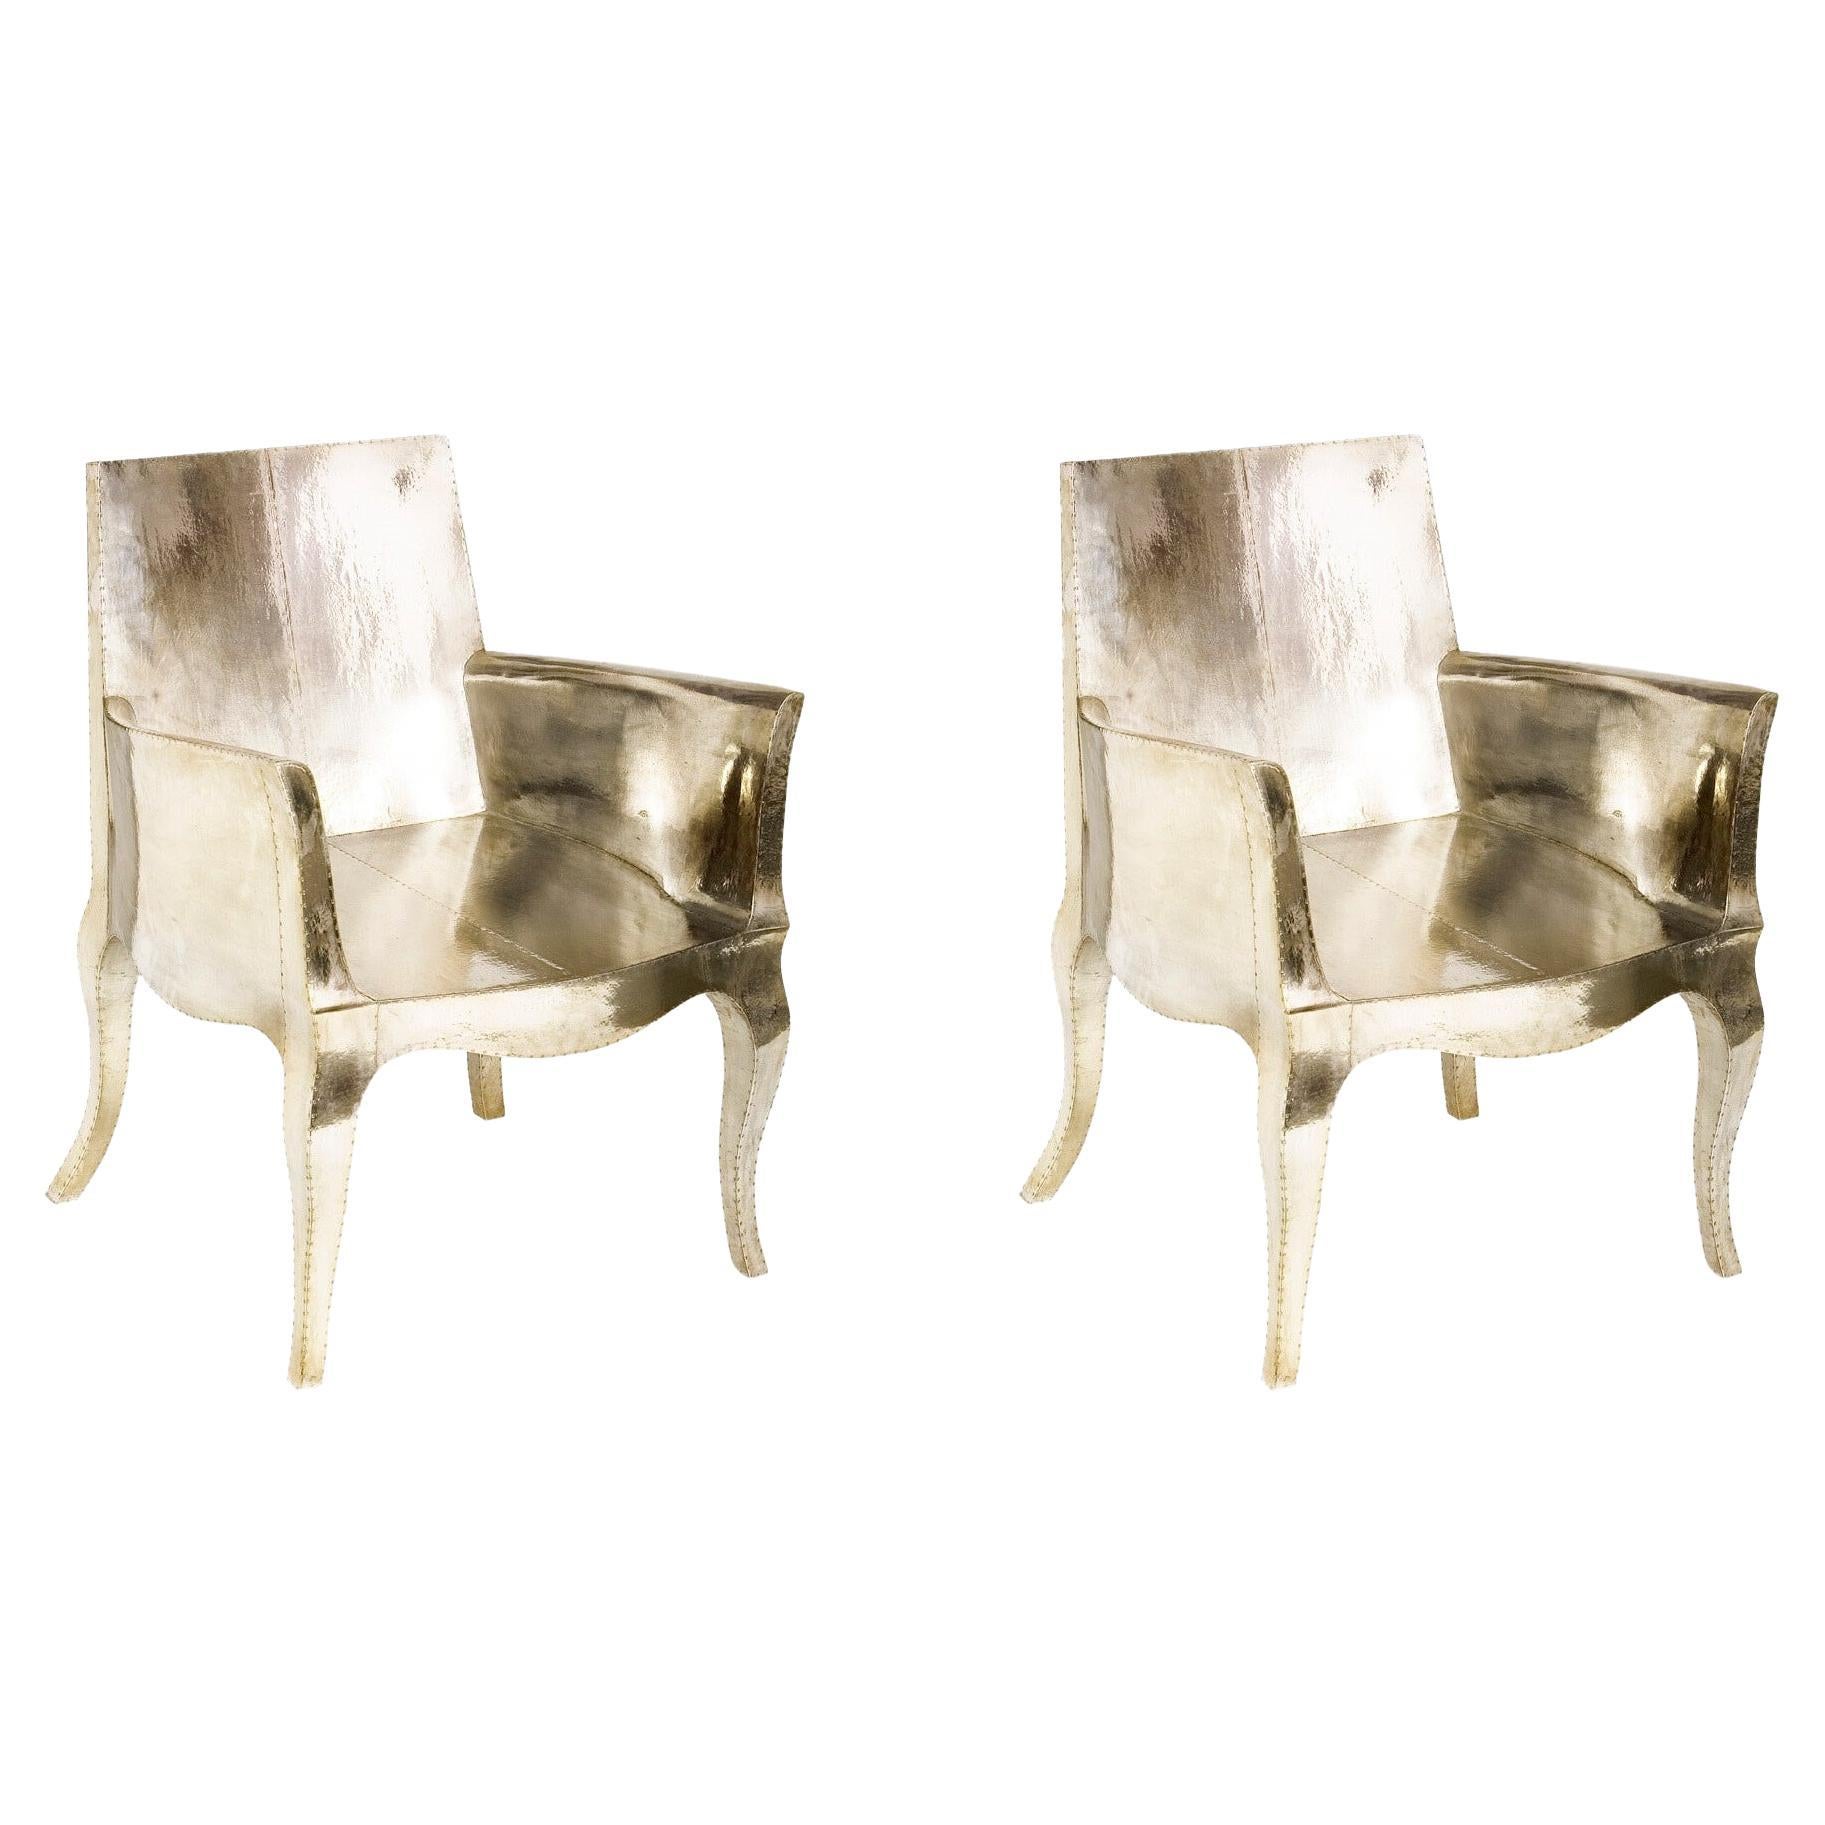 Art Nouveau Dining Chairs Pair Designed by Paul Mathieu for Stephanie Odegard For Sale